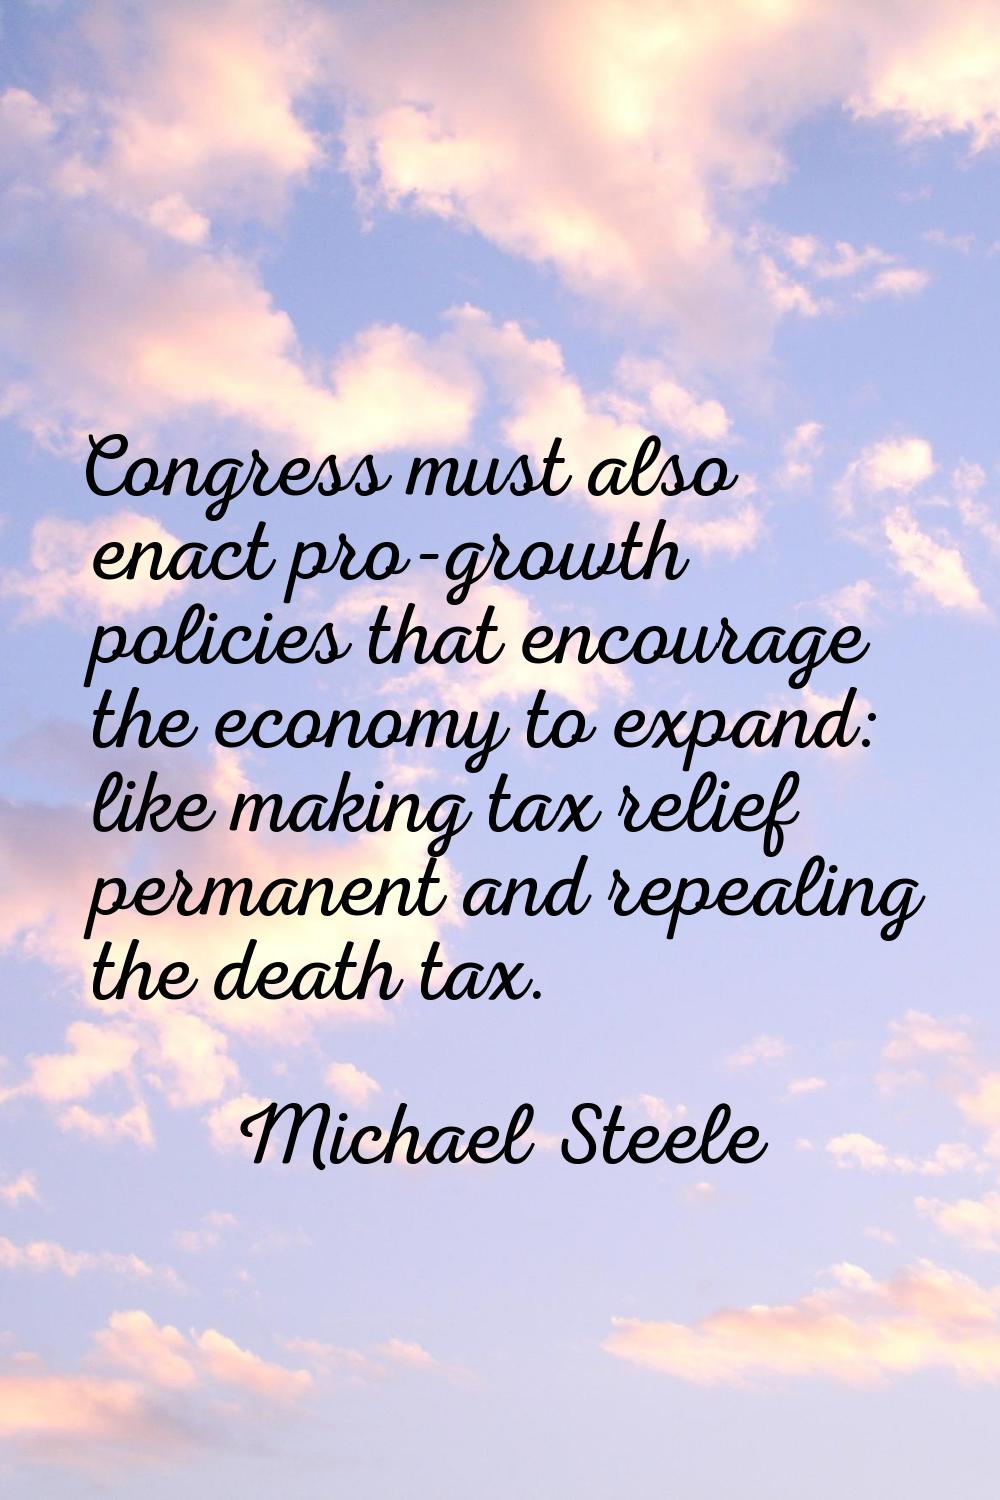 Congress must also enact pro-growth policies that encourage the economy to expand: like making tax 